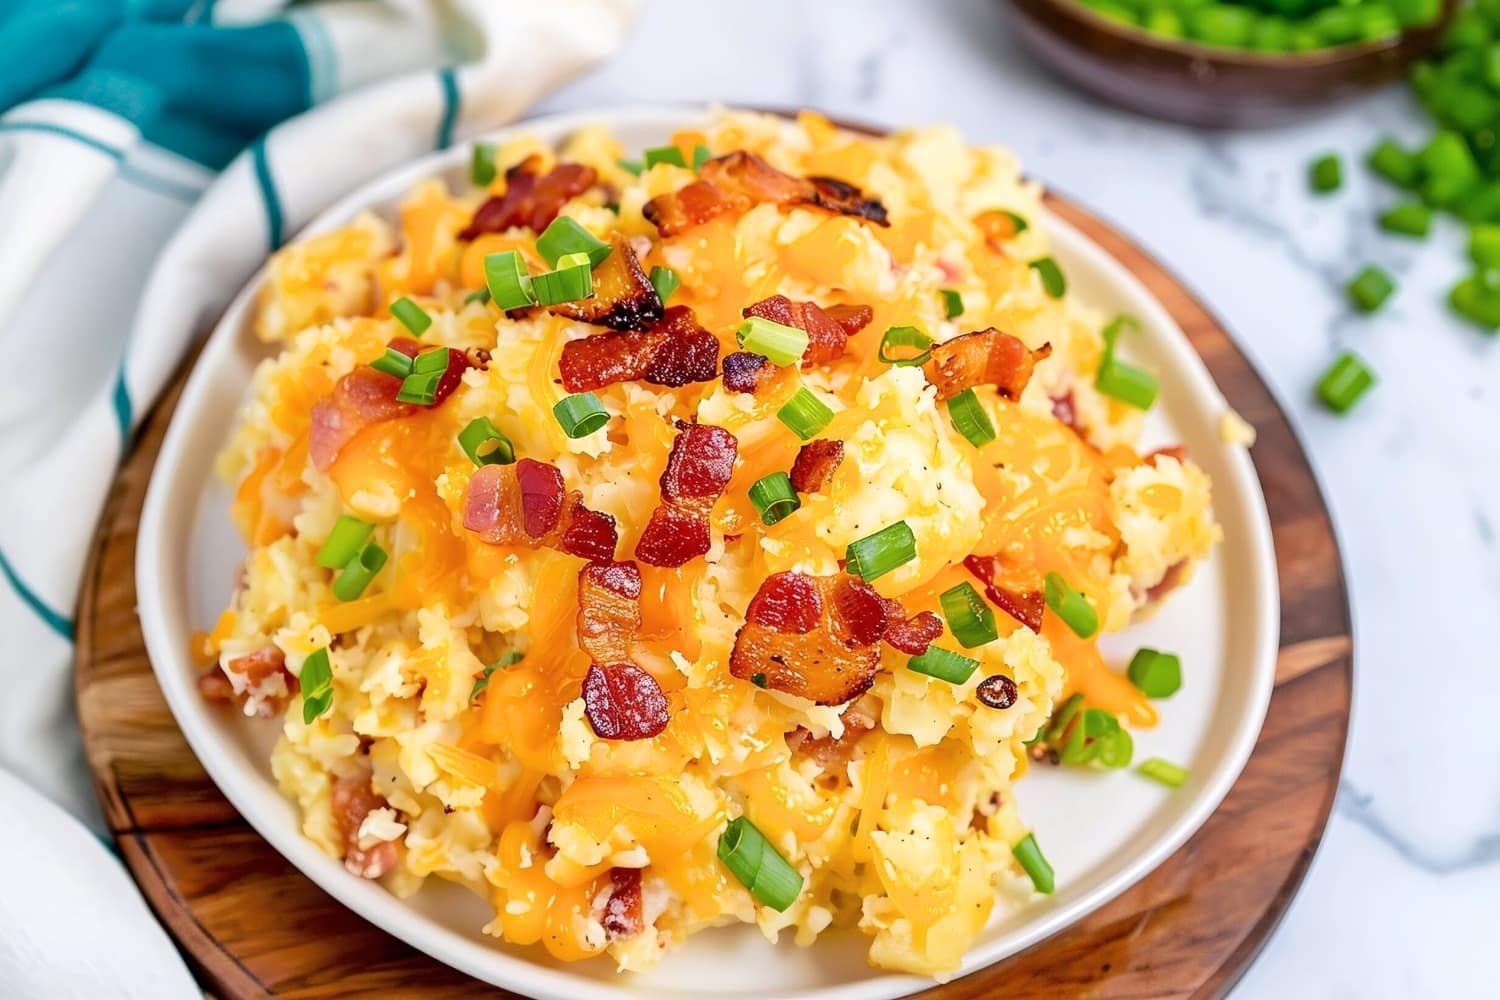 Homemade cheesy crack potatoes with crispy bacon and green onions